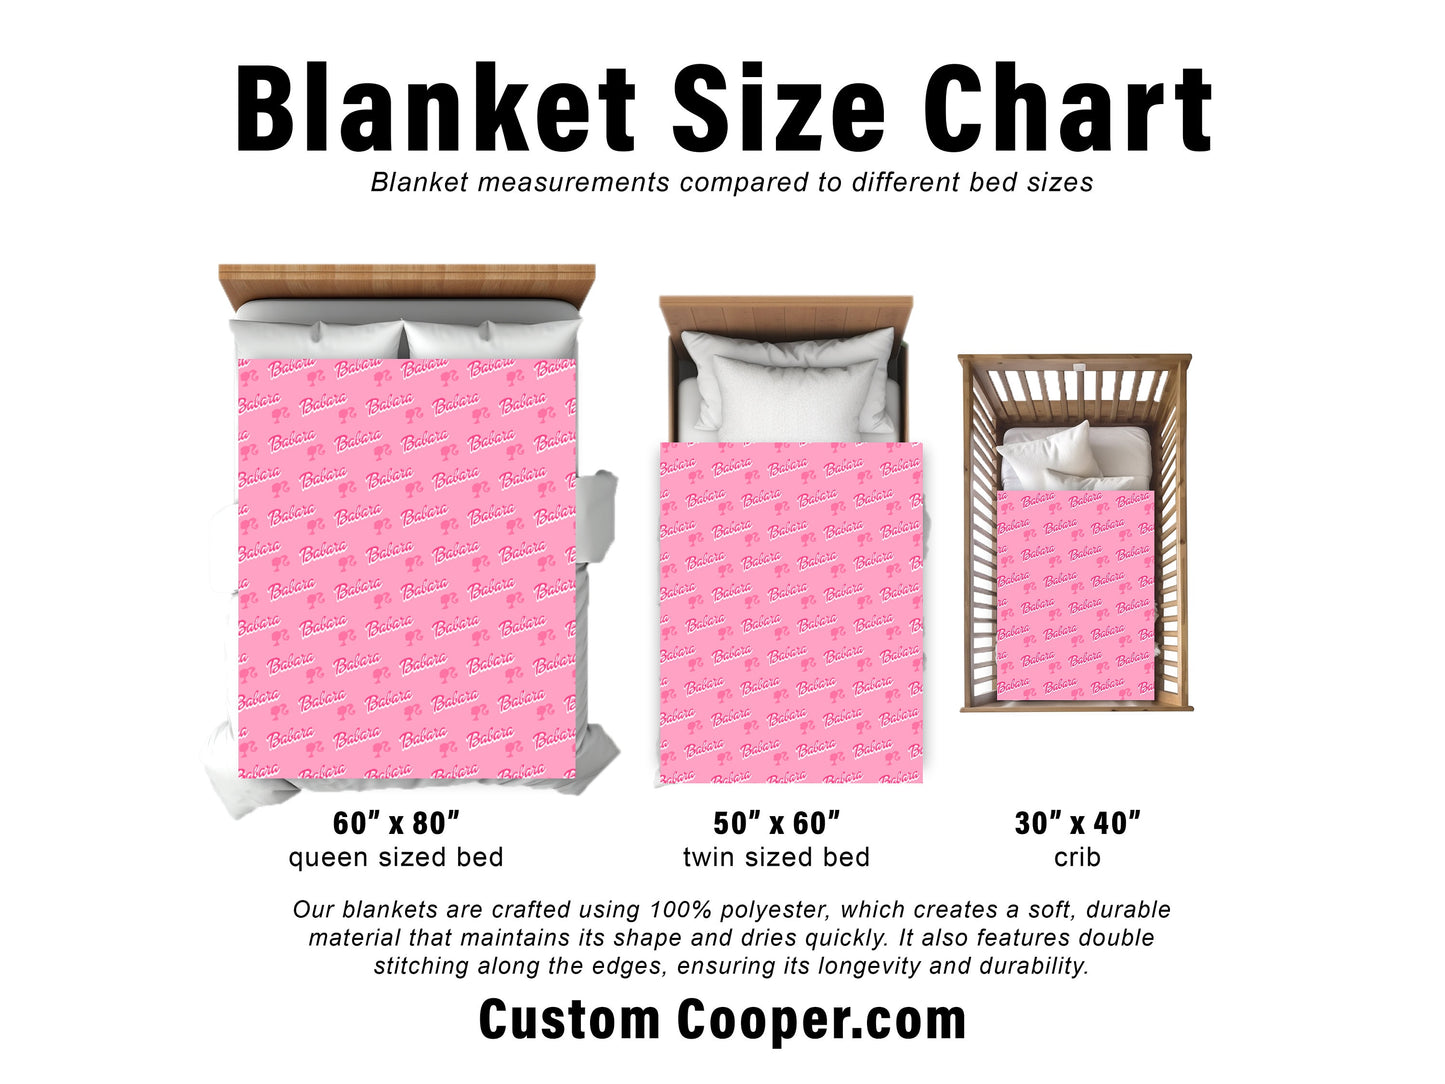 Cool Kids Design Personalize blanket, Minky or Sherpa custom blanket, Baby blanket, Kids Blanket, birthday gift idea